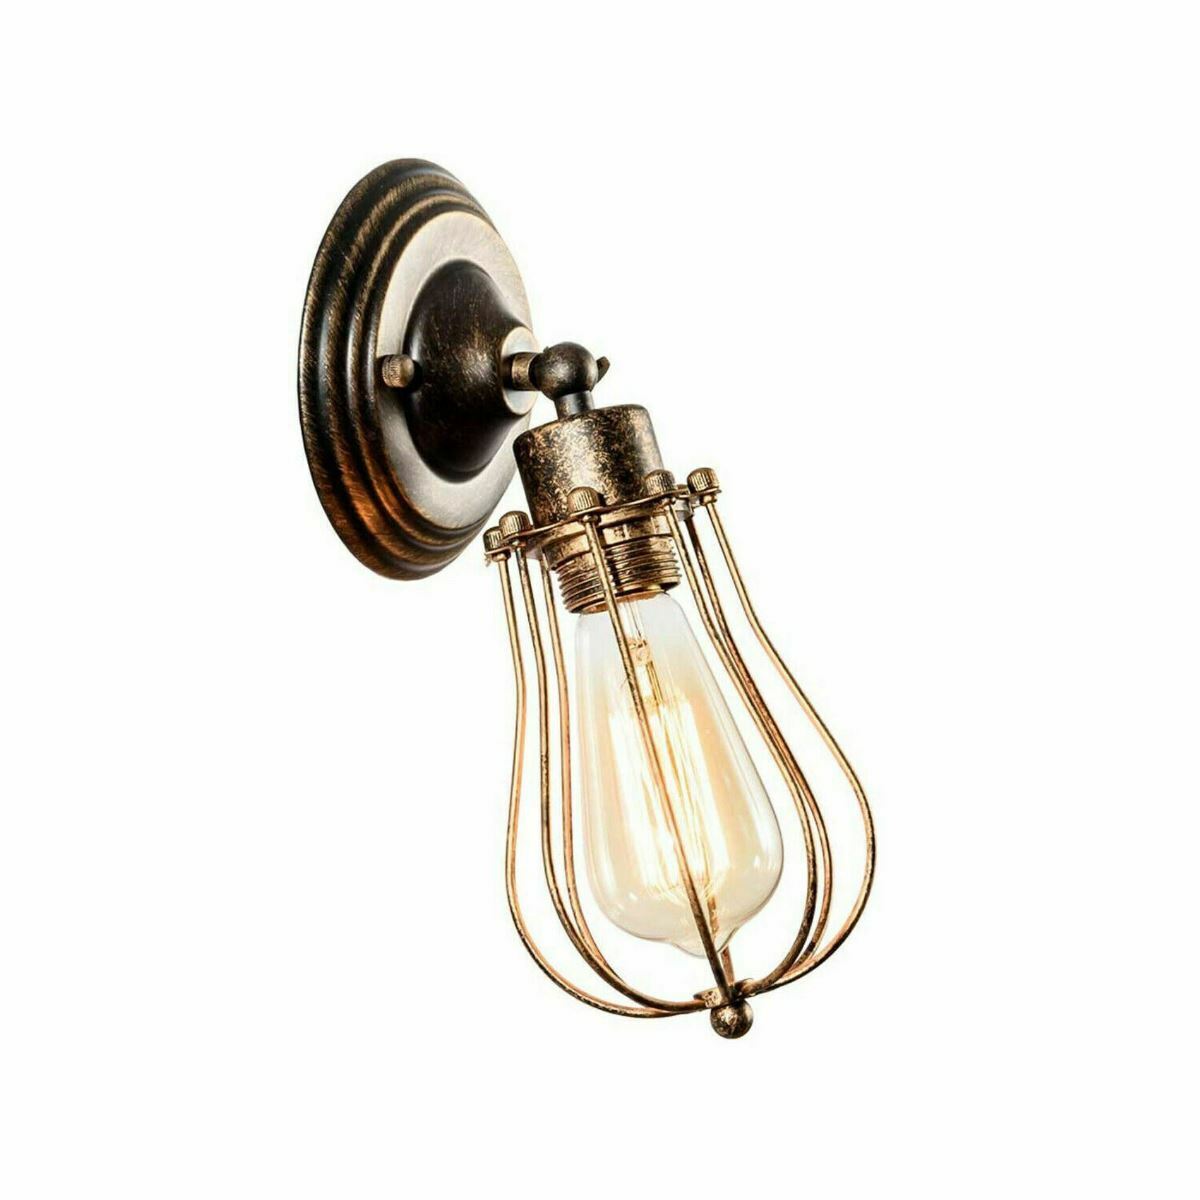 Brushed Copper Wall Sconces Wall Lighting.JPG